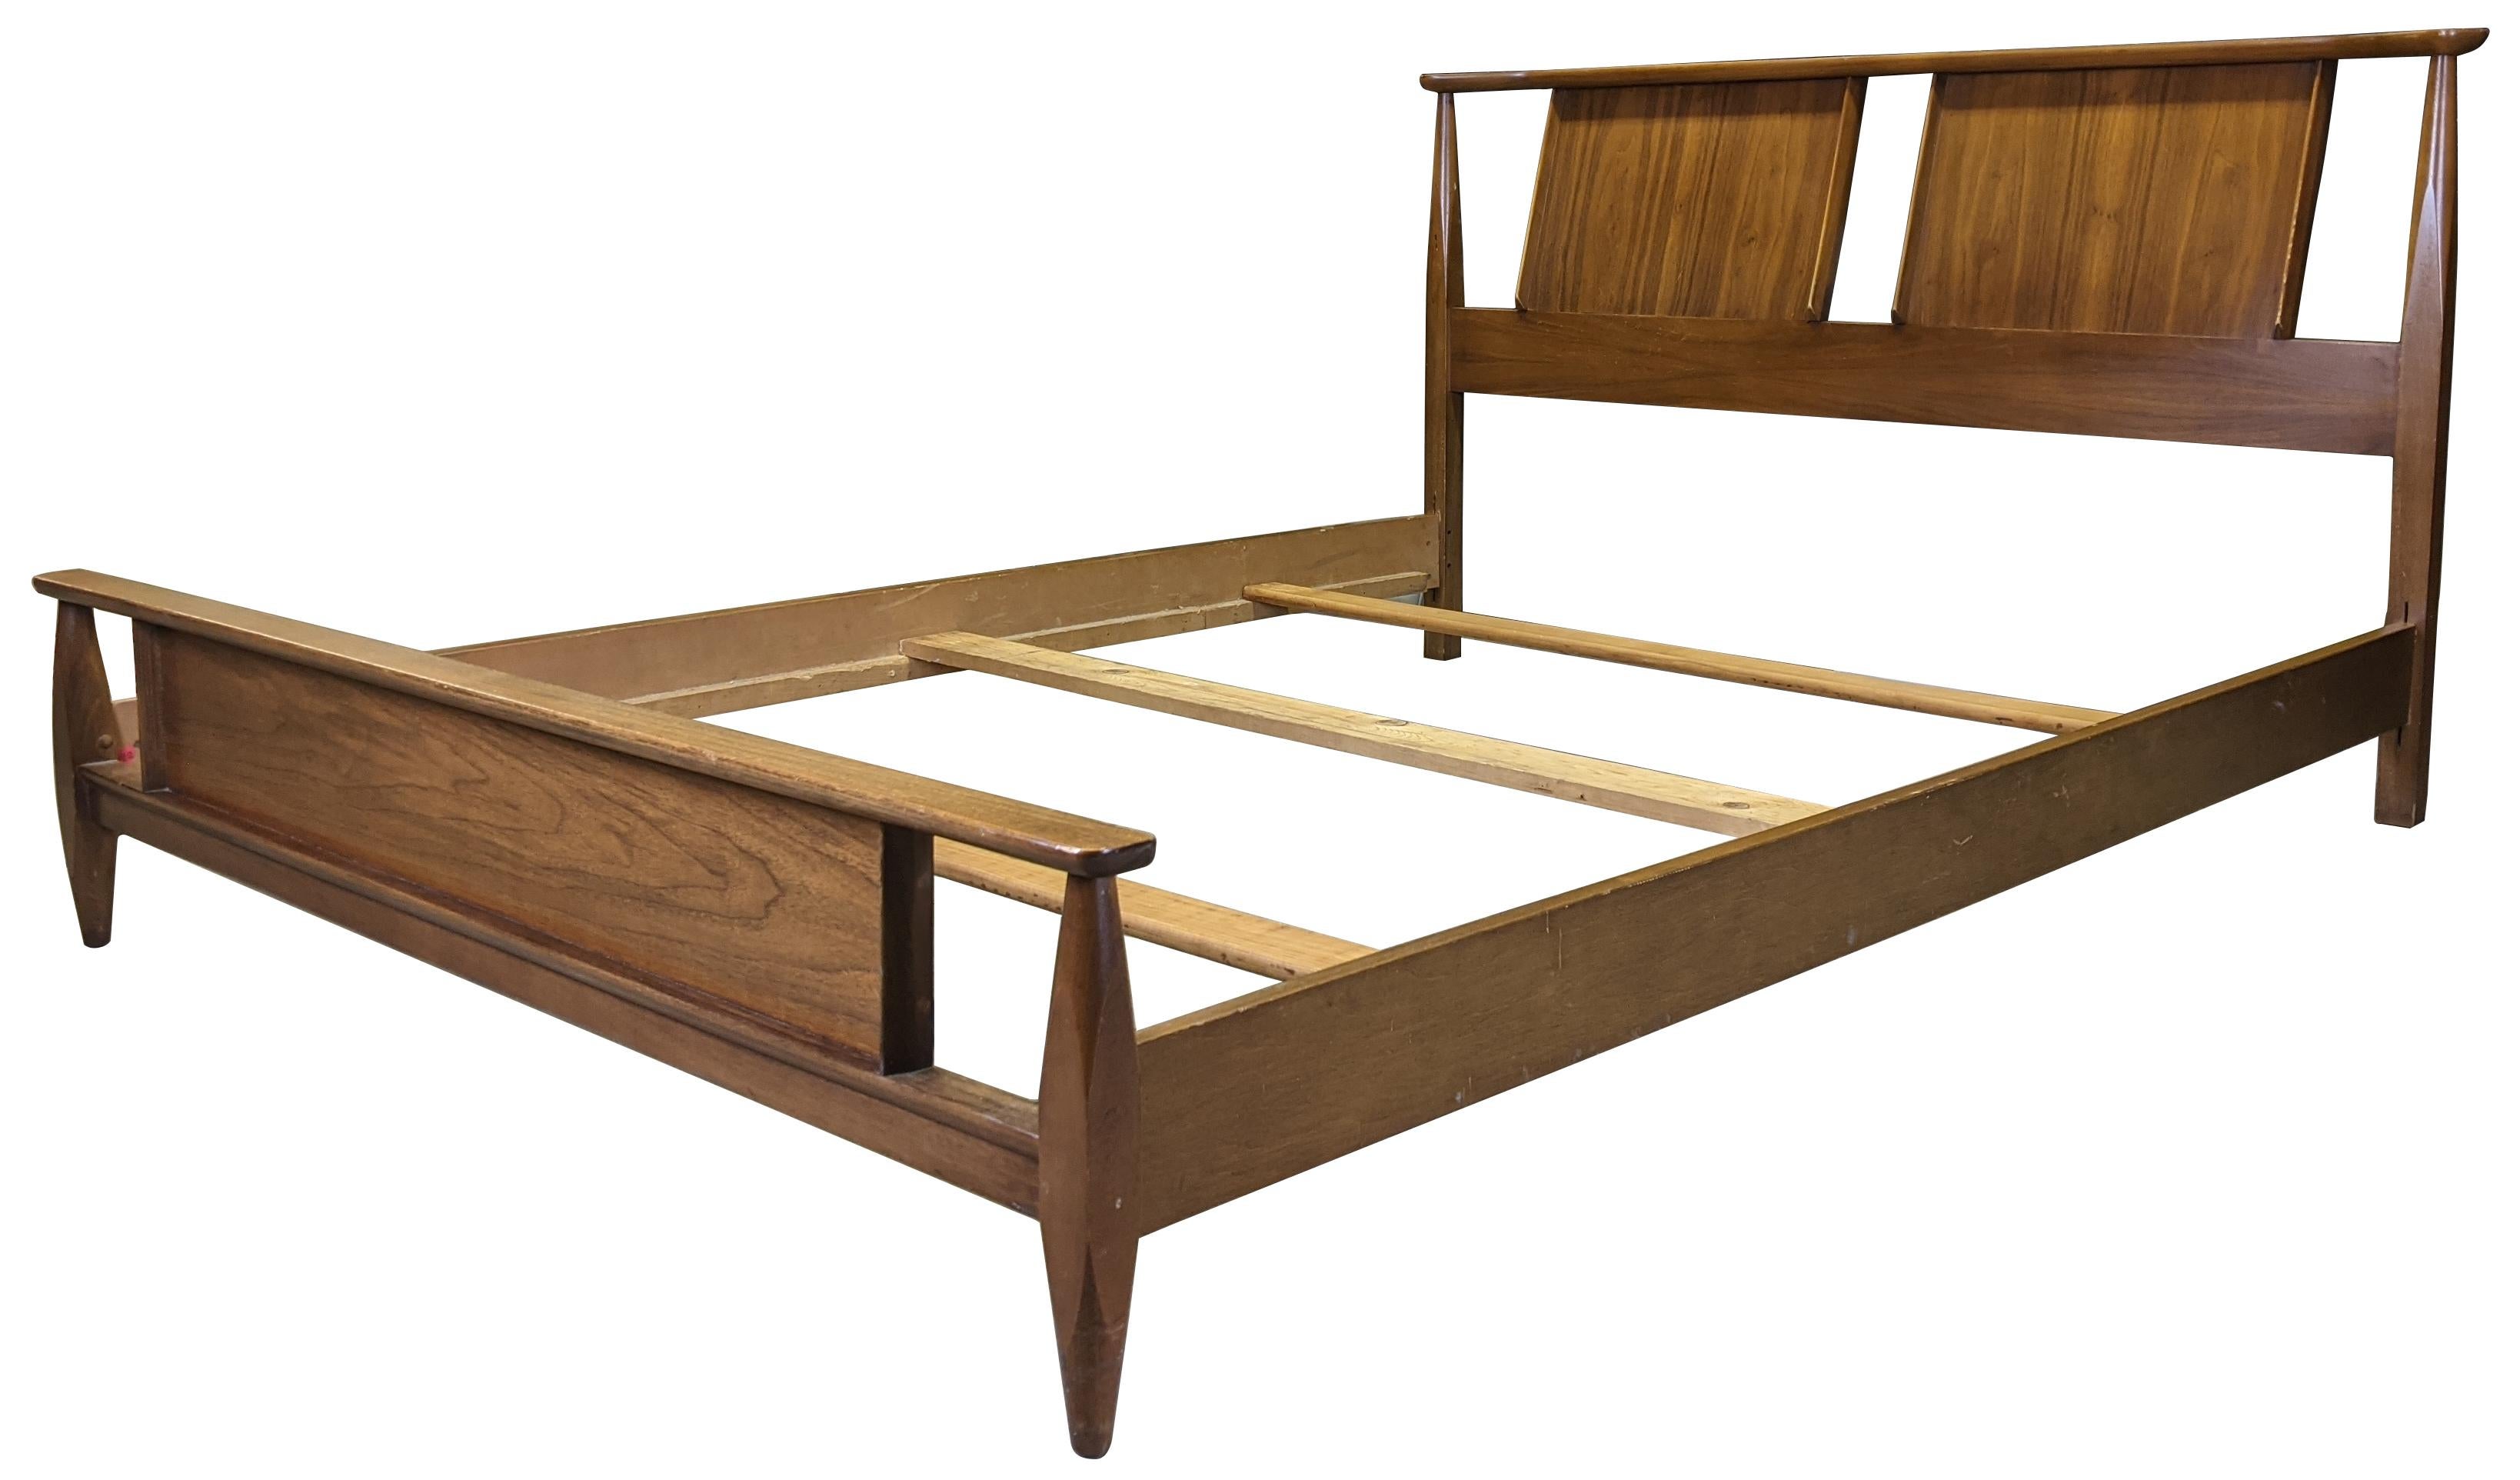 Vintage sculptural shaped full size bed by Kent Coffee. Made from continental walnut with tapered legs, circa 1960s. #6900.

Measures: Rail height 9